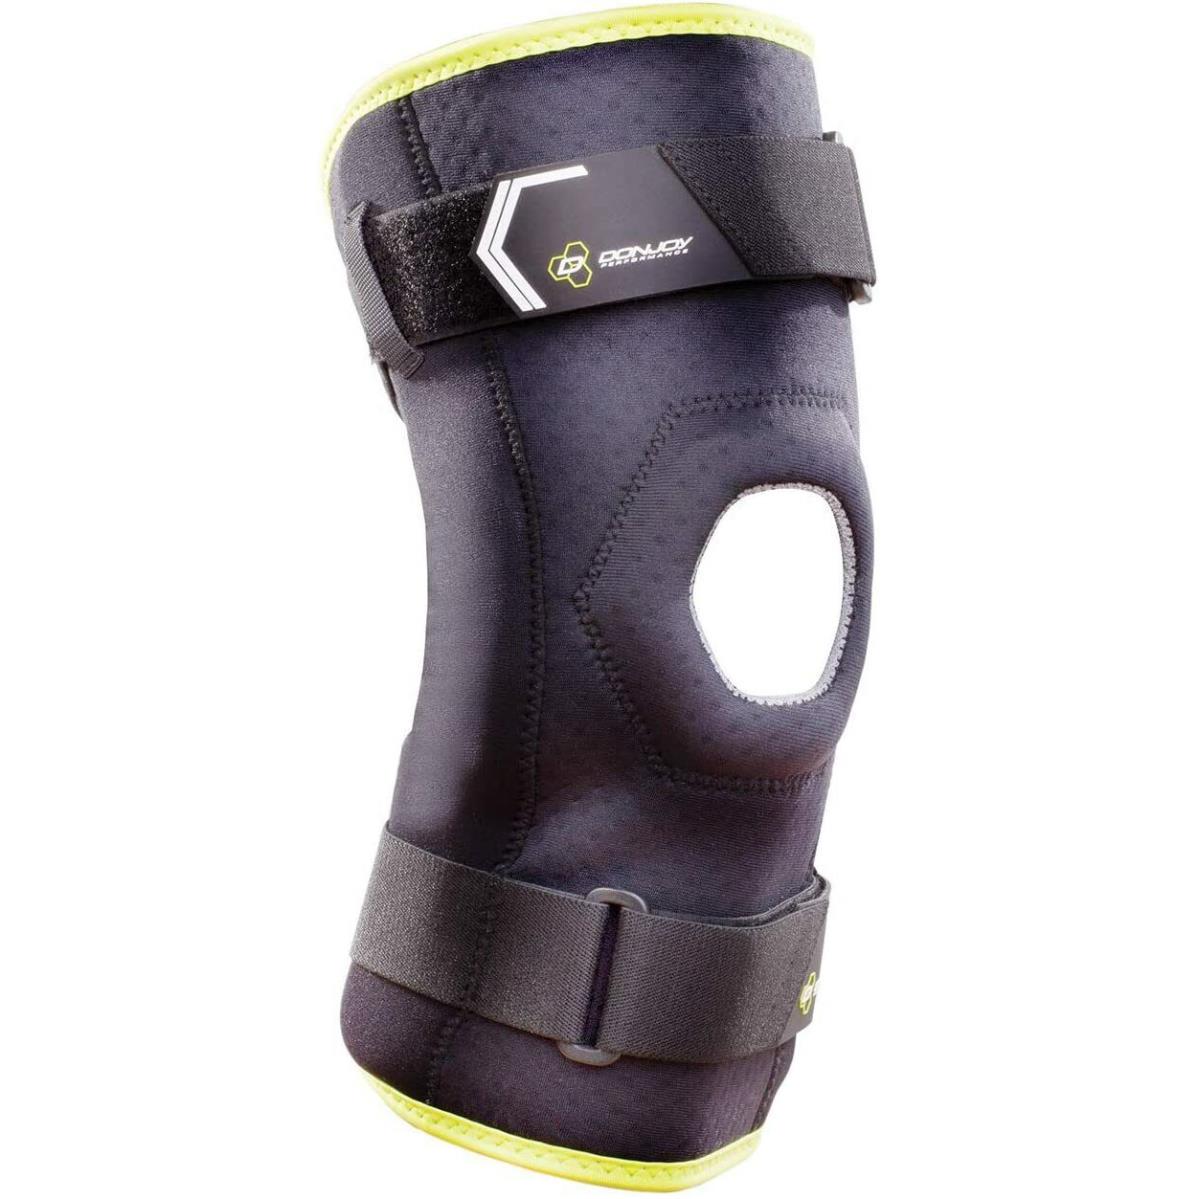 Donjoy Performance Bionic Comfort Hinged Knee Brace Sports Support Size S / M - Black